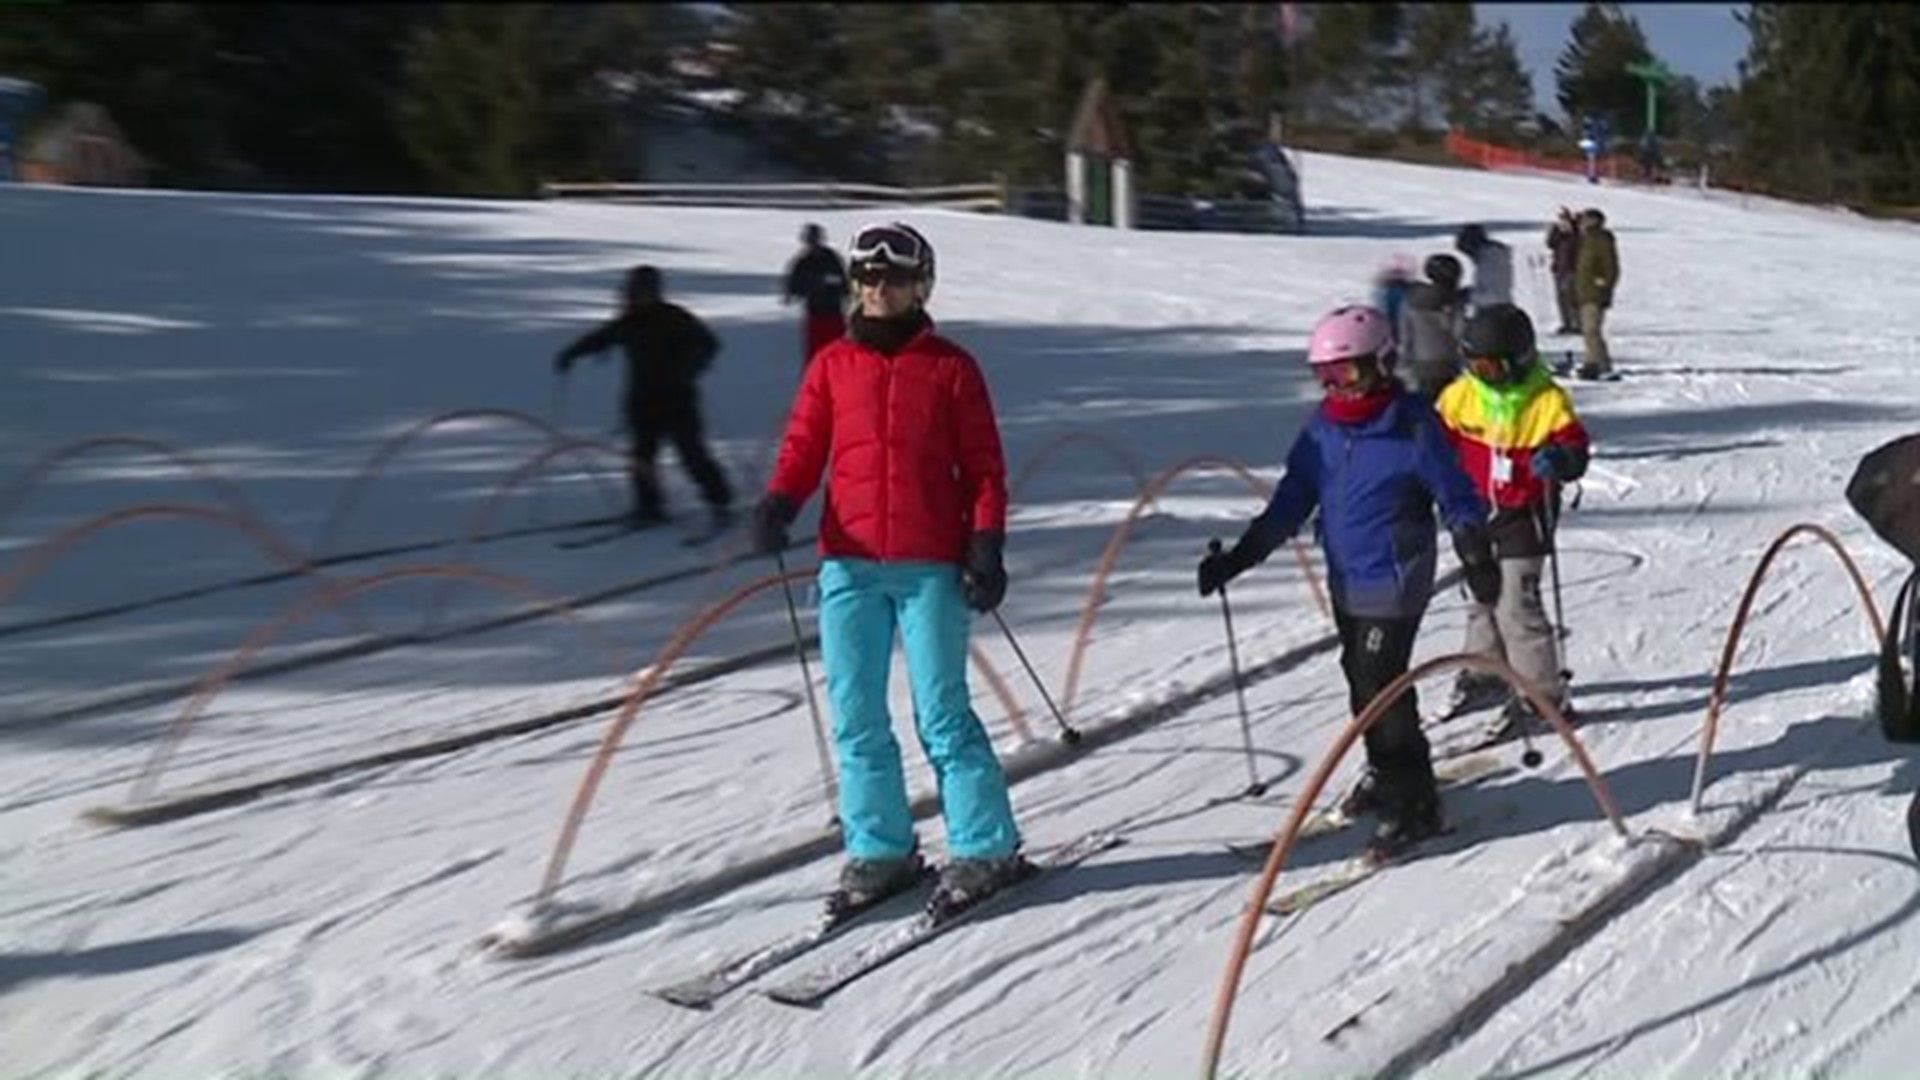 Great Weather for Holiday Weekend on the Slopes